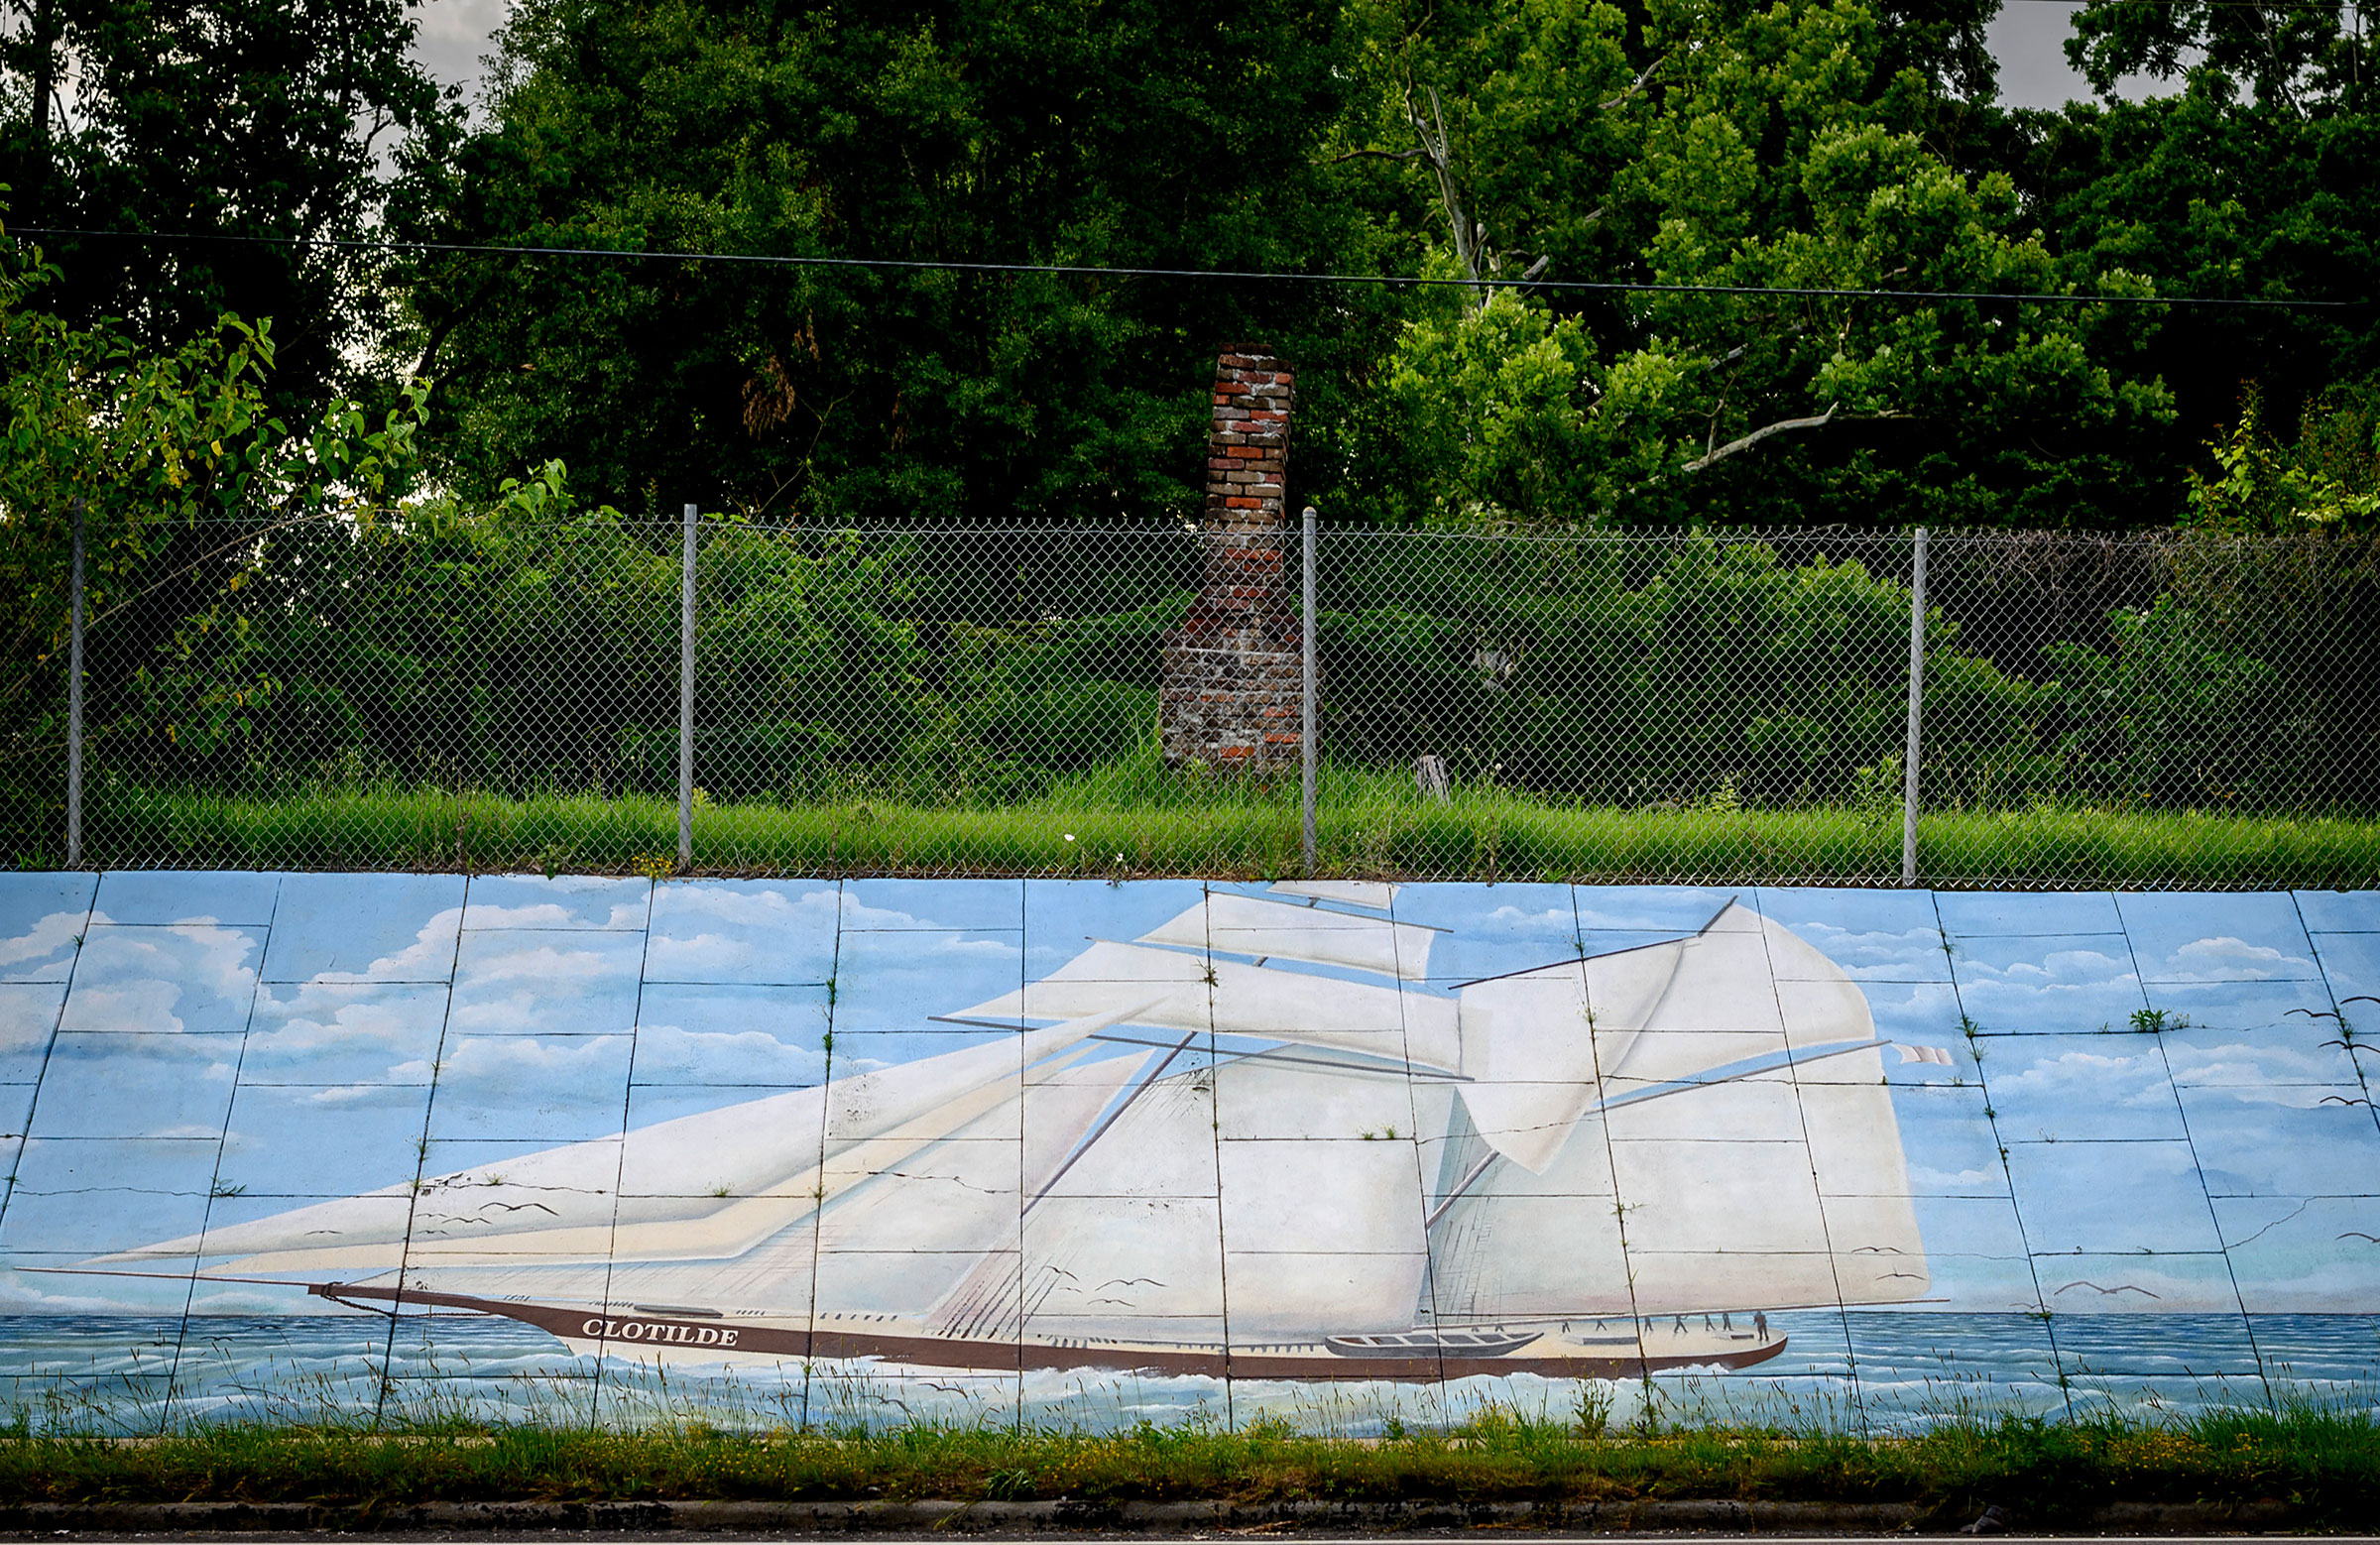 A mural depicting the schooner Clotilda, which carried the last cargo of enslaved Africans known to have been delivered to the United States, in Mobile, Ala.